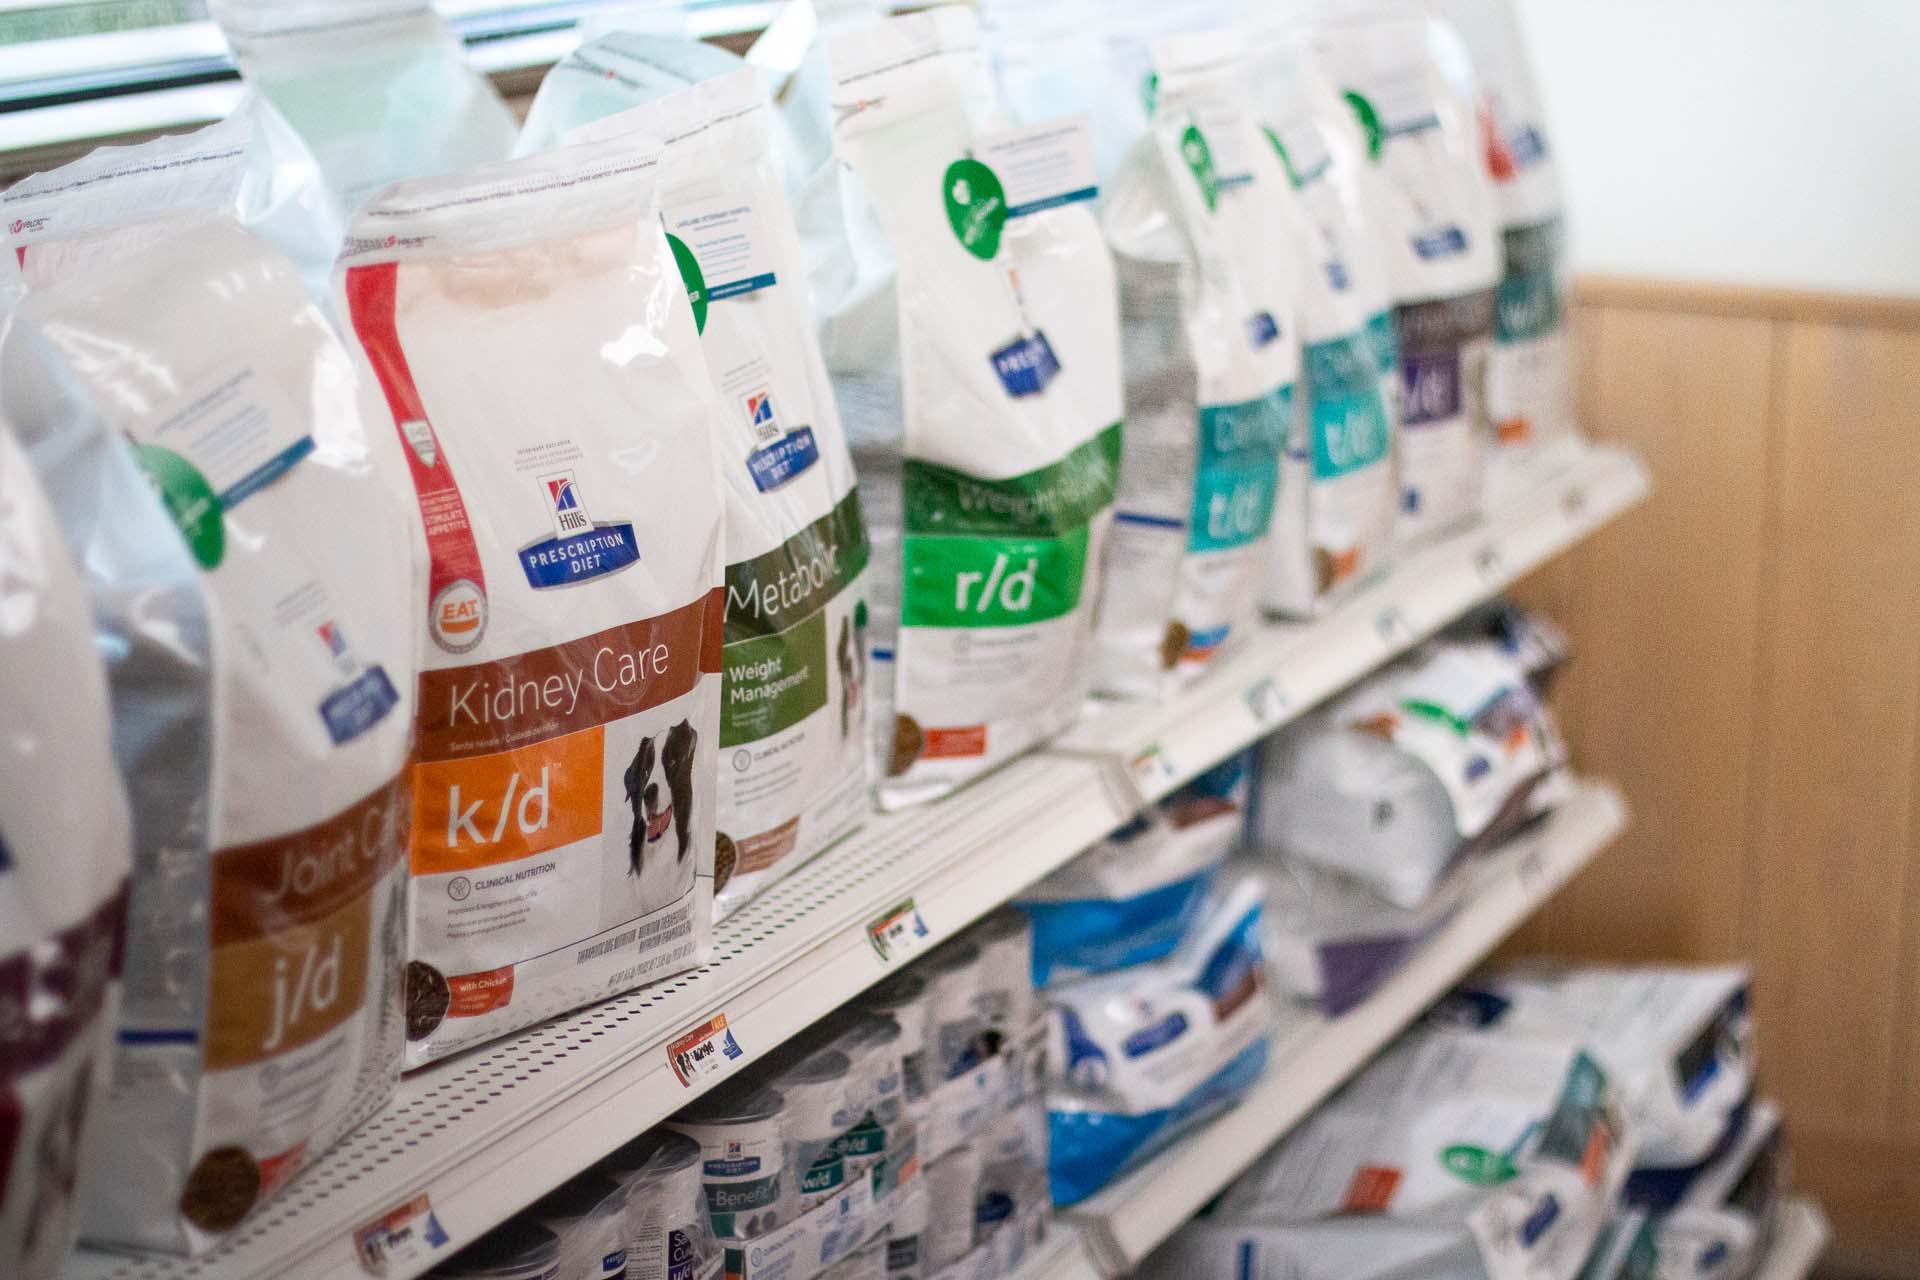 We carry a variety of pet foods and products that can conveniently be purchased in-house. Lakeland Veterinary Hospital Baxter (218)829-1709